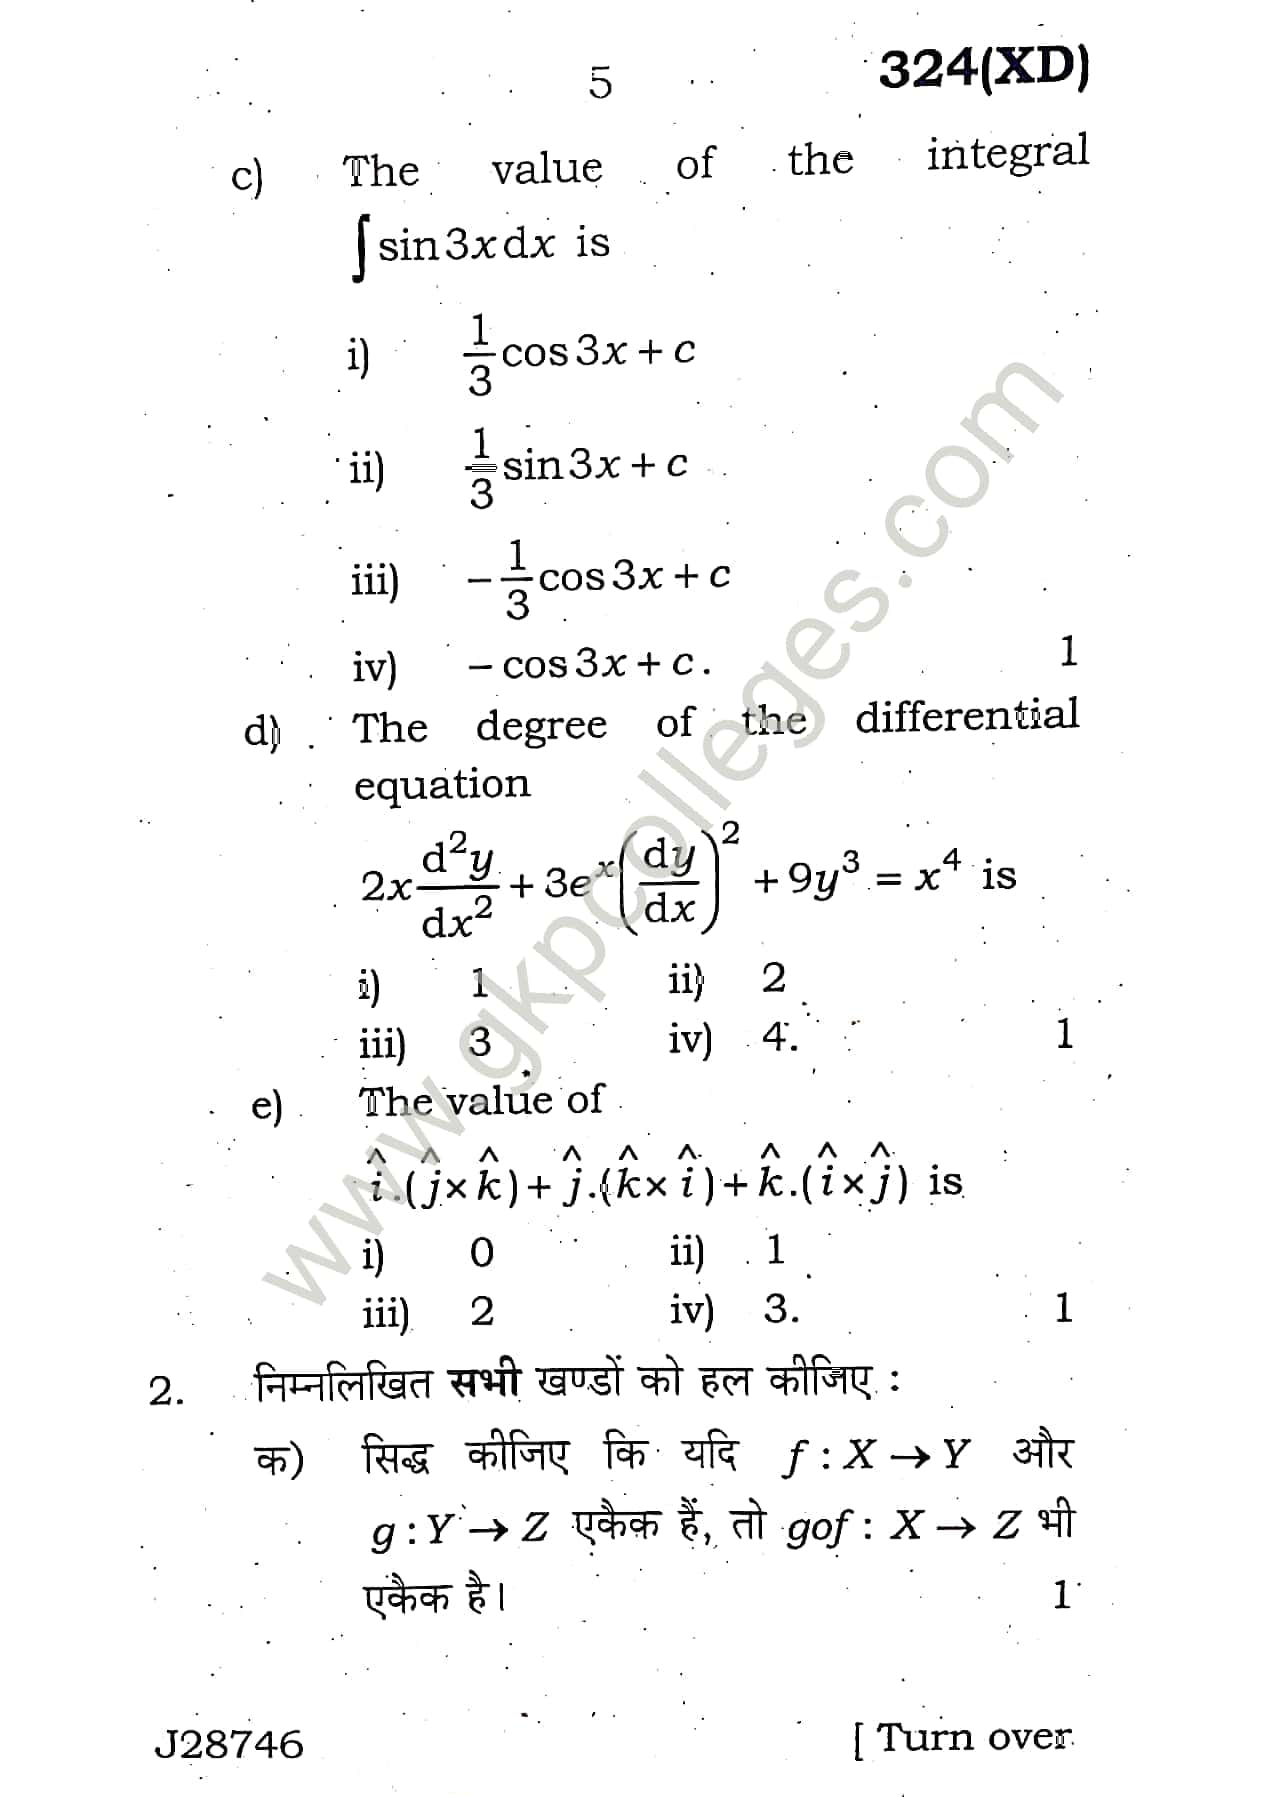 Mathematics, UP Board Question Paper for 12th of Examination 2020